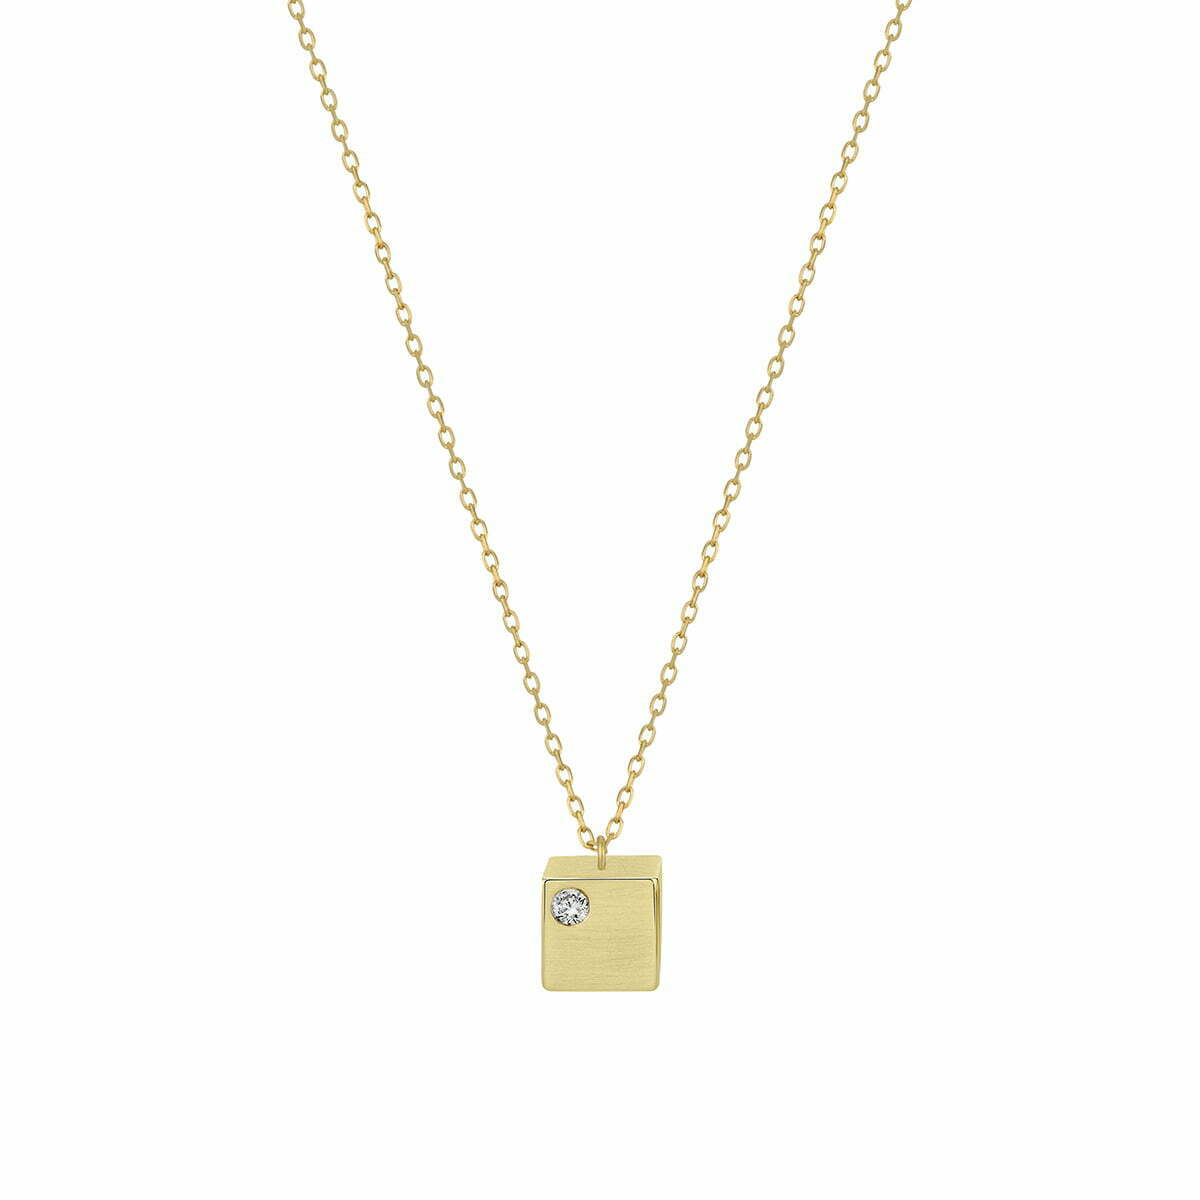 Cube Pendant in 14k Yellow Gold with Diamond